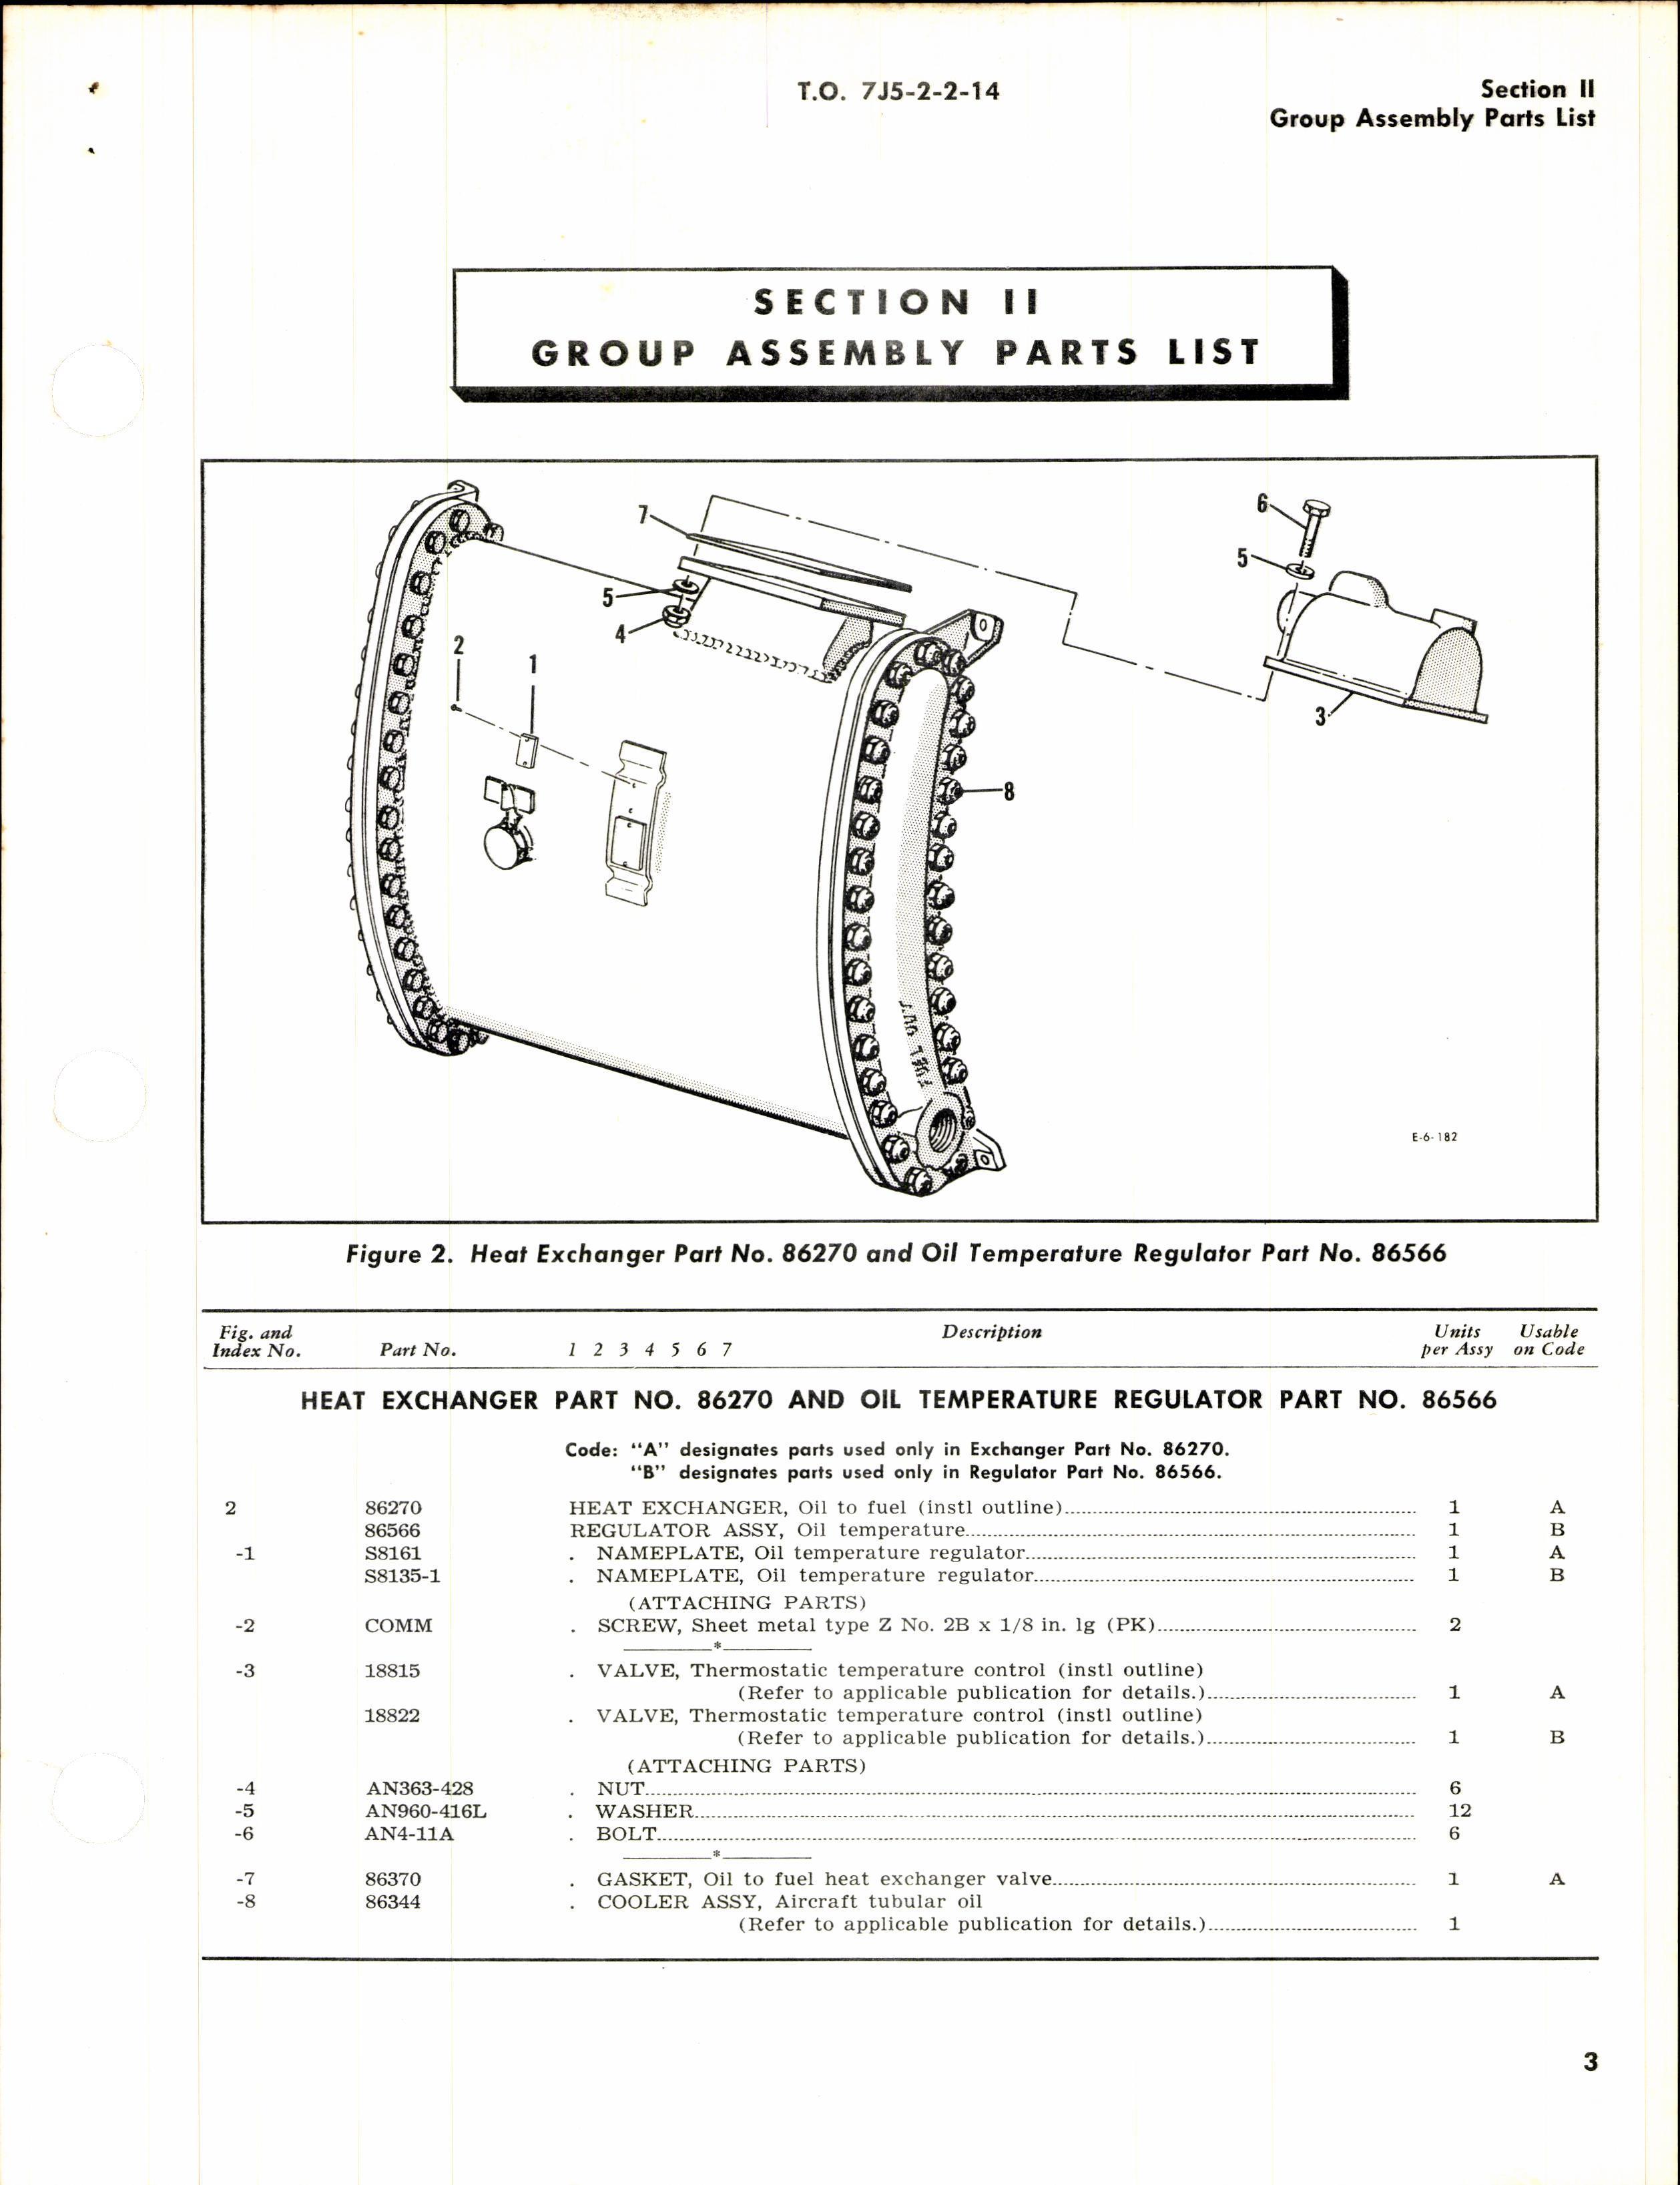 Sample page 5 from AirCorps Library document: Illustrated Parts Breakdown for Oil Temperature Regulators, Heat Exchanges, and Fuel Temperature Regulators 